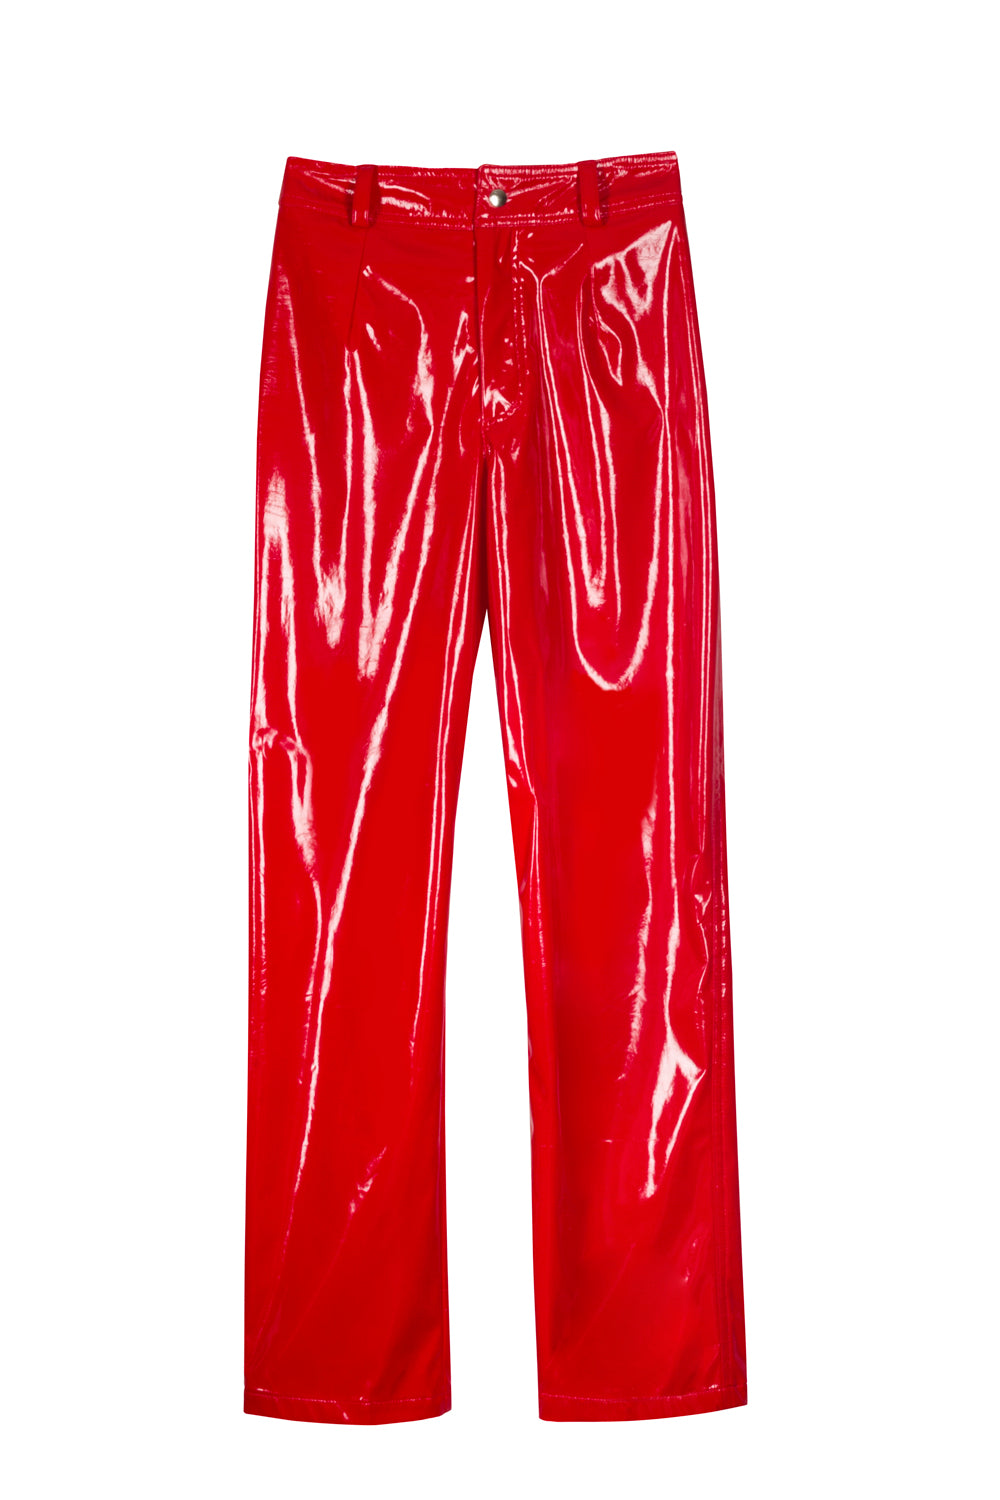 Plastic Pants for Adults Stylish and Trendy 